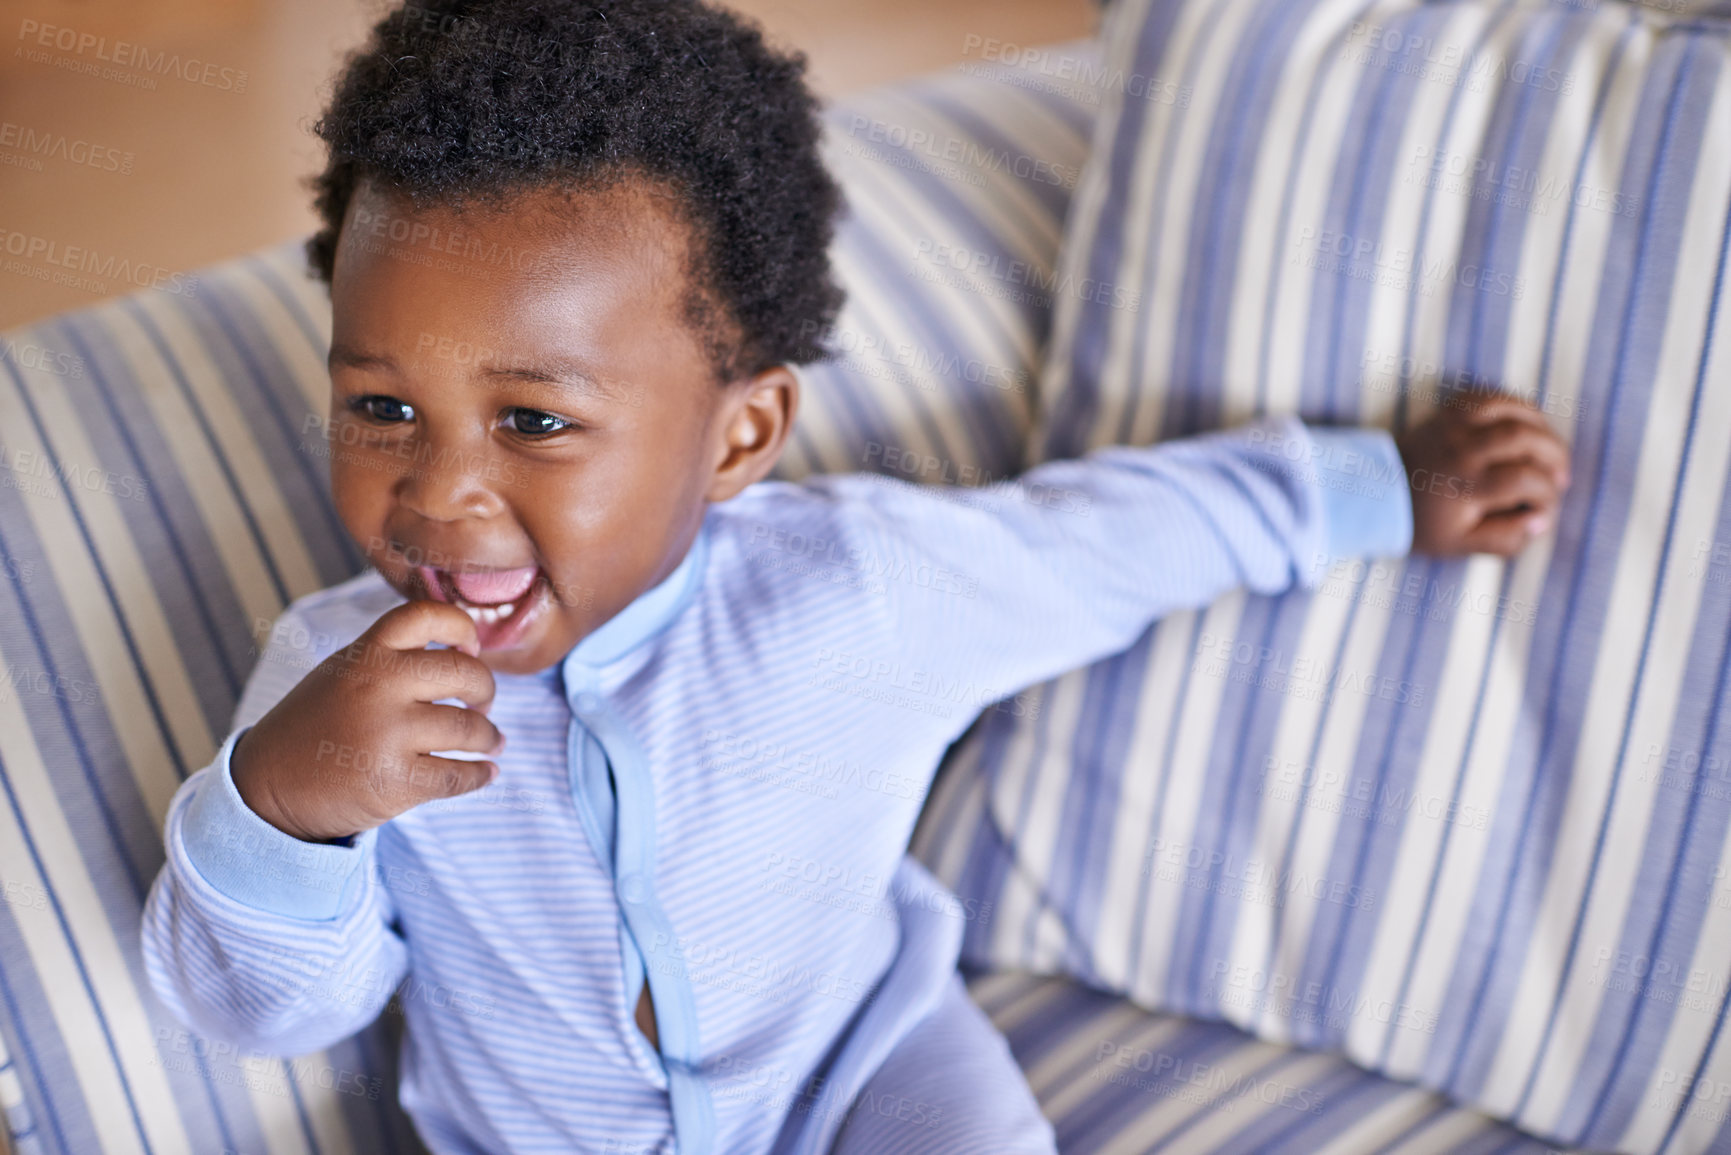 Buy stock photo Baby, smile or sofa as play, fun or game for leisure and playing, growth as relax, learn or humor. Excited, black boy child or laugh as curious confidence for motor skill coordination or development